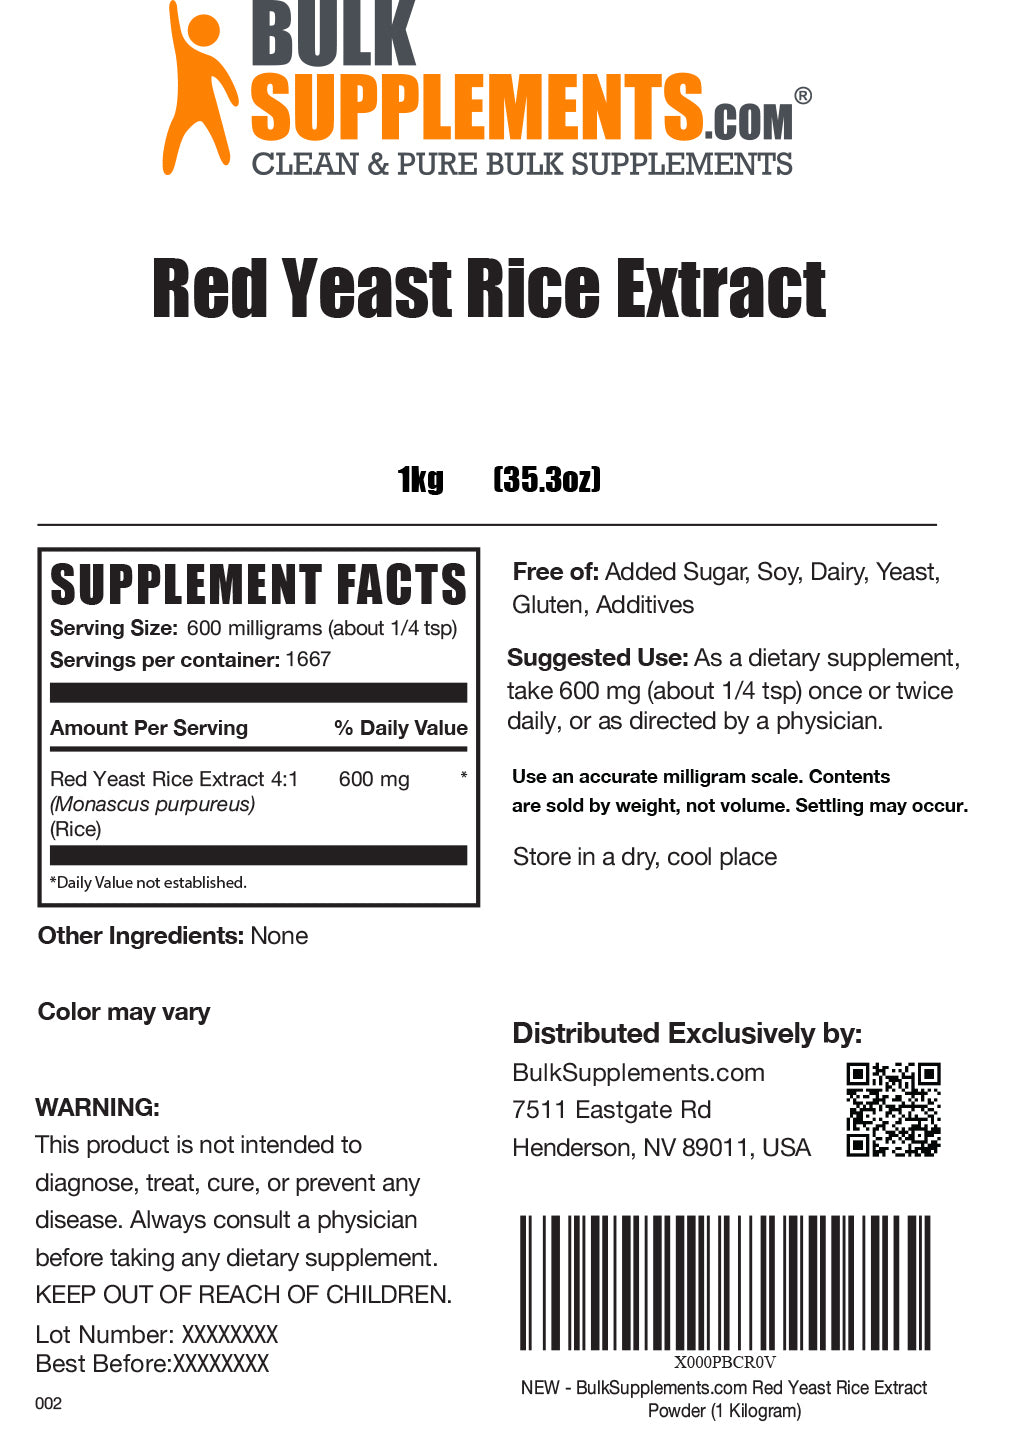 Supplement Facts for Red Yeast Rice Extract Powder